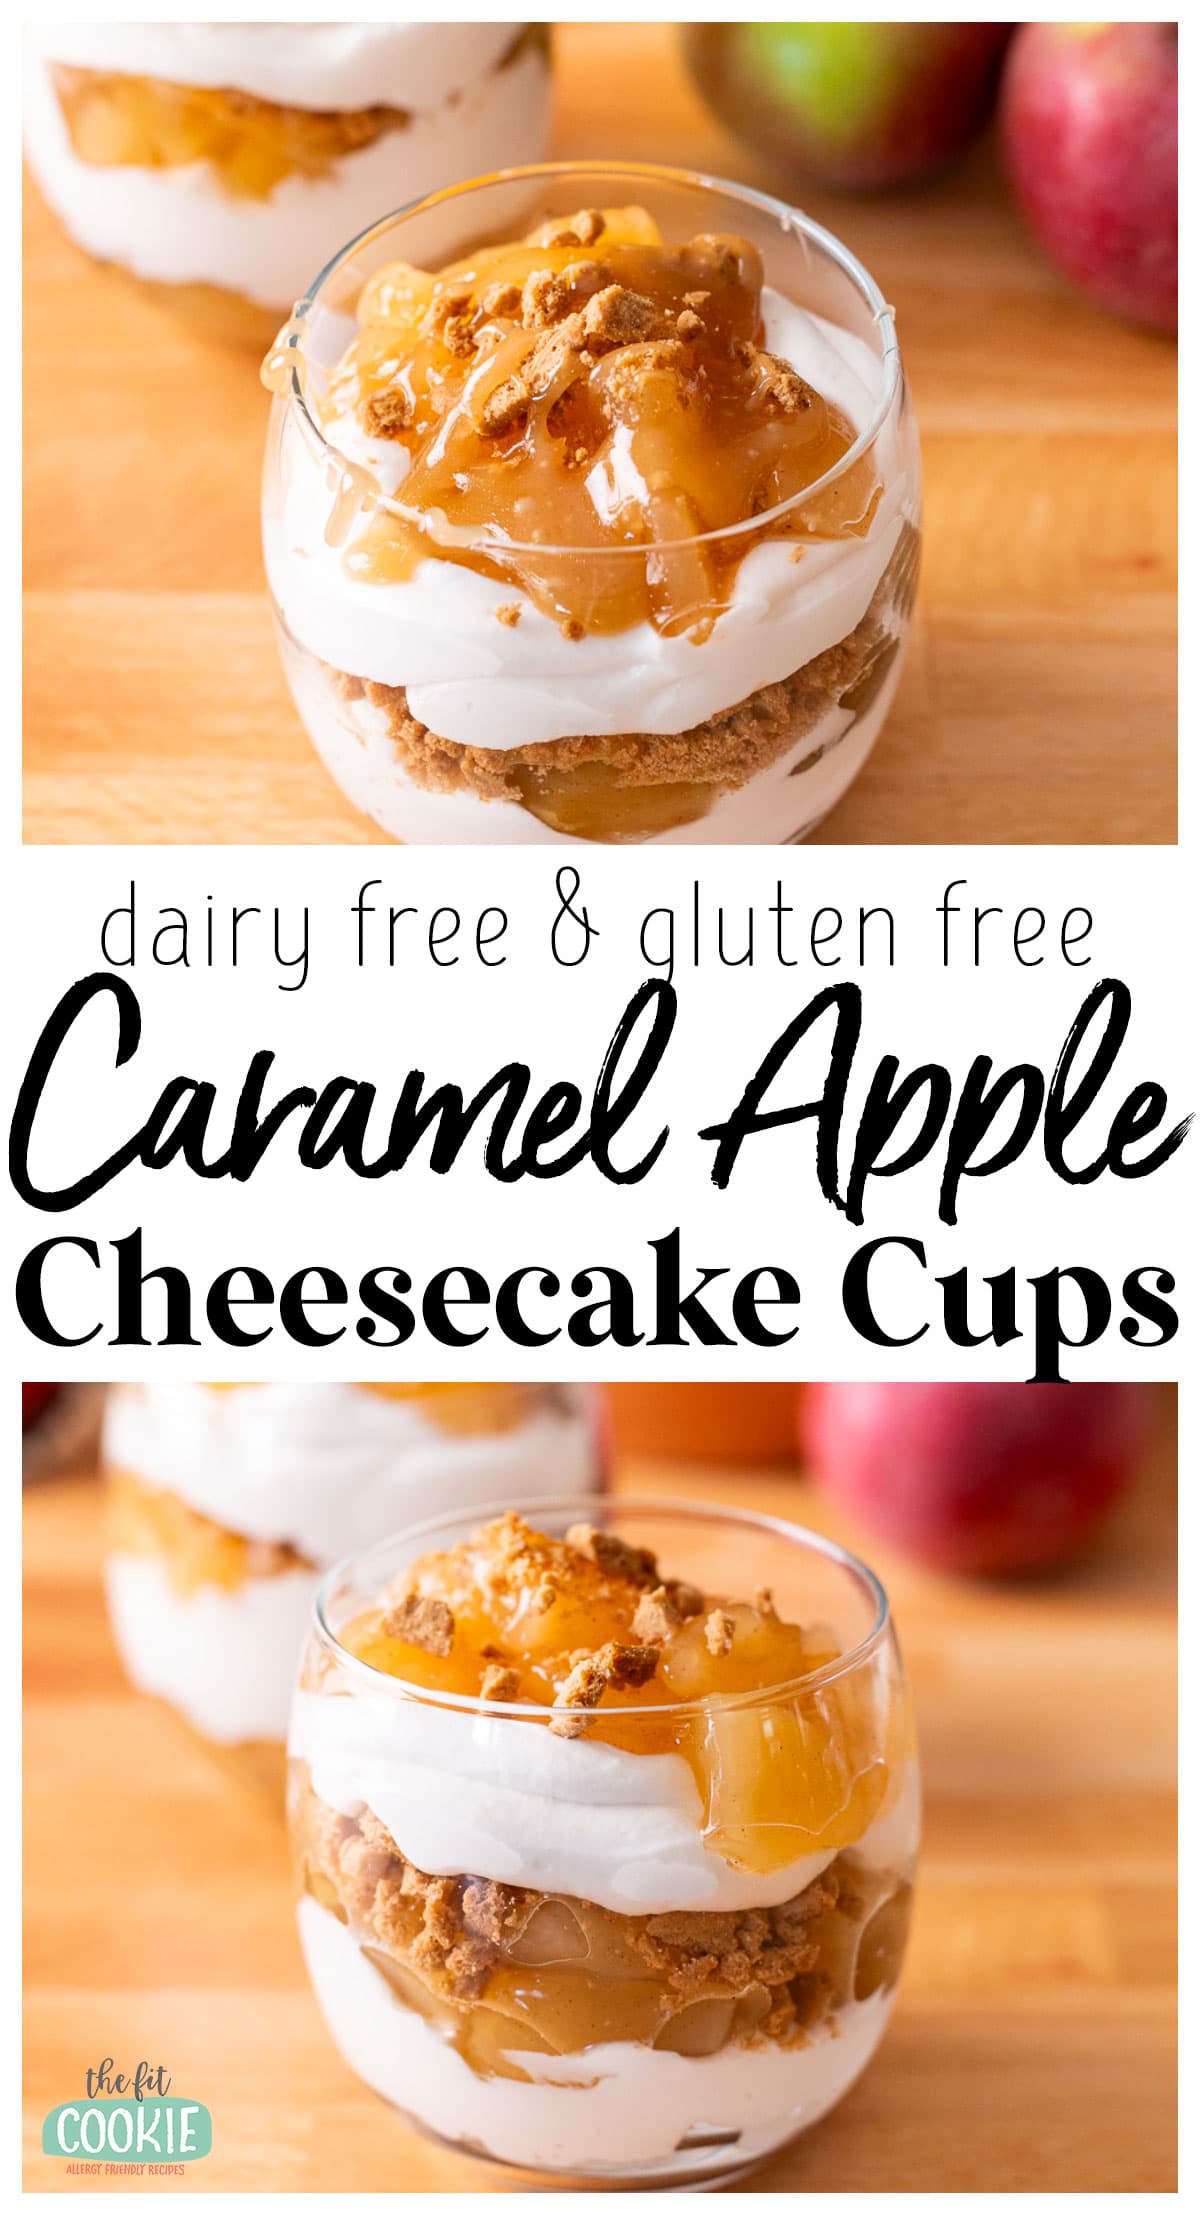 photo collage showing dairy free and gluten free caramel apple cheesecake cups.